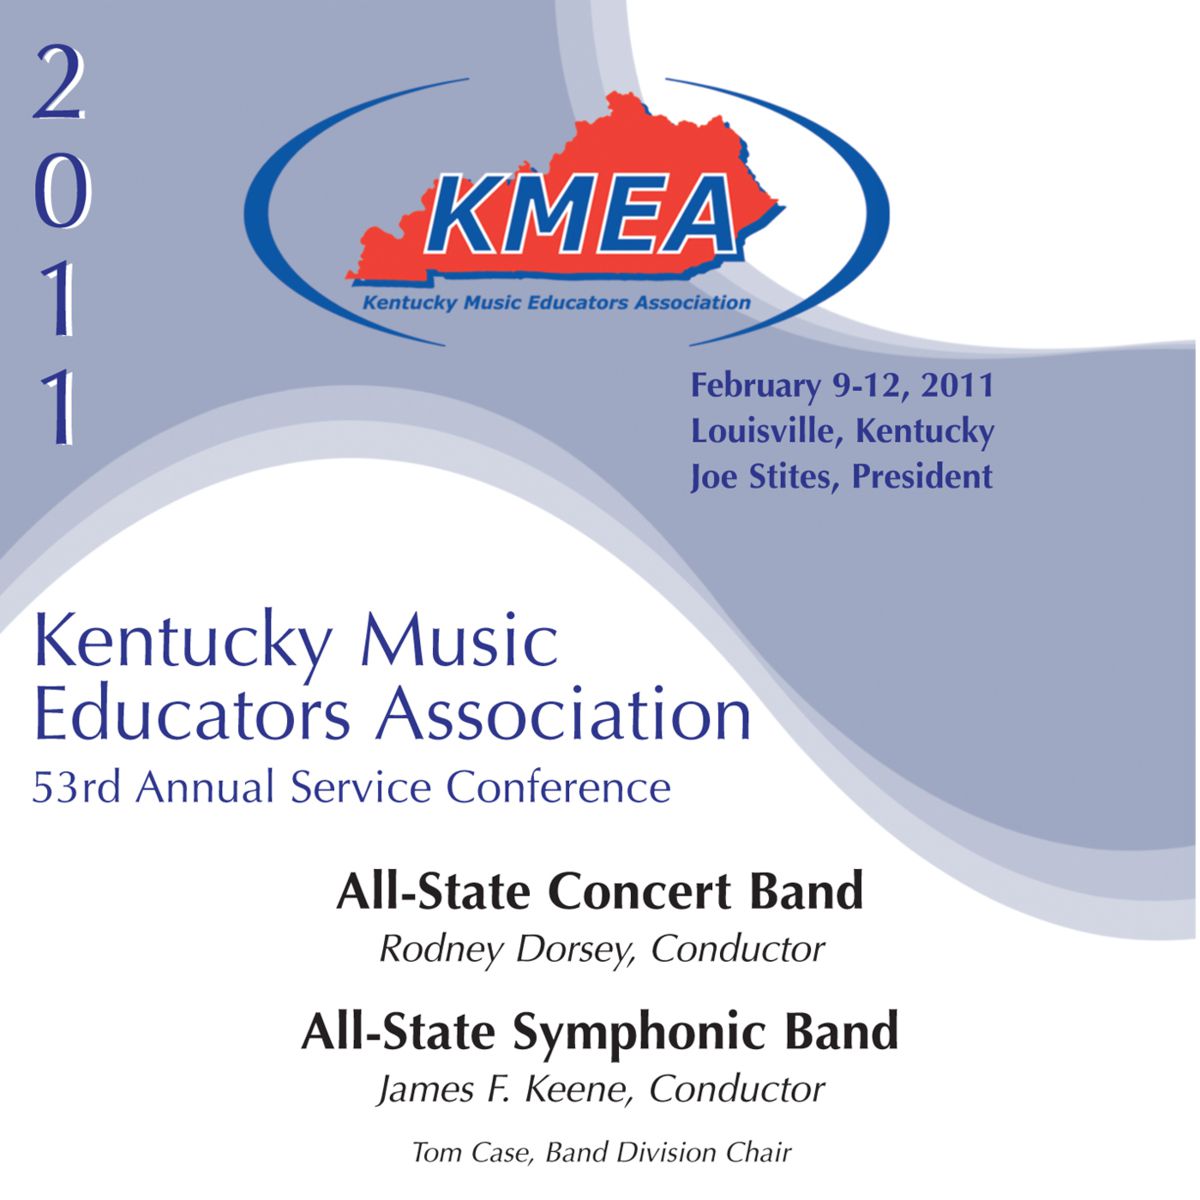 2011 Kentucky Music Educators Association: All-State Concert Band and All-State Symphonic Band - click here